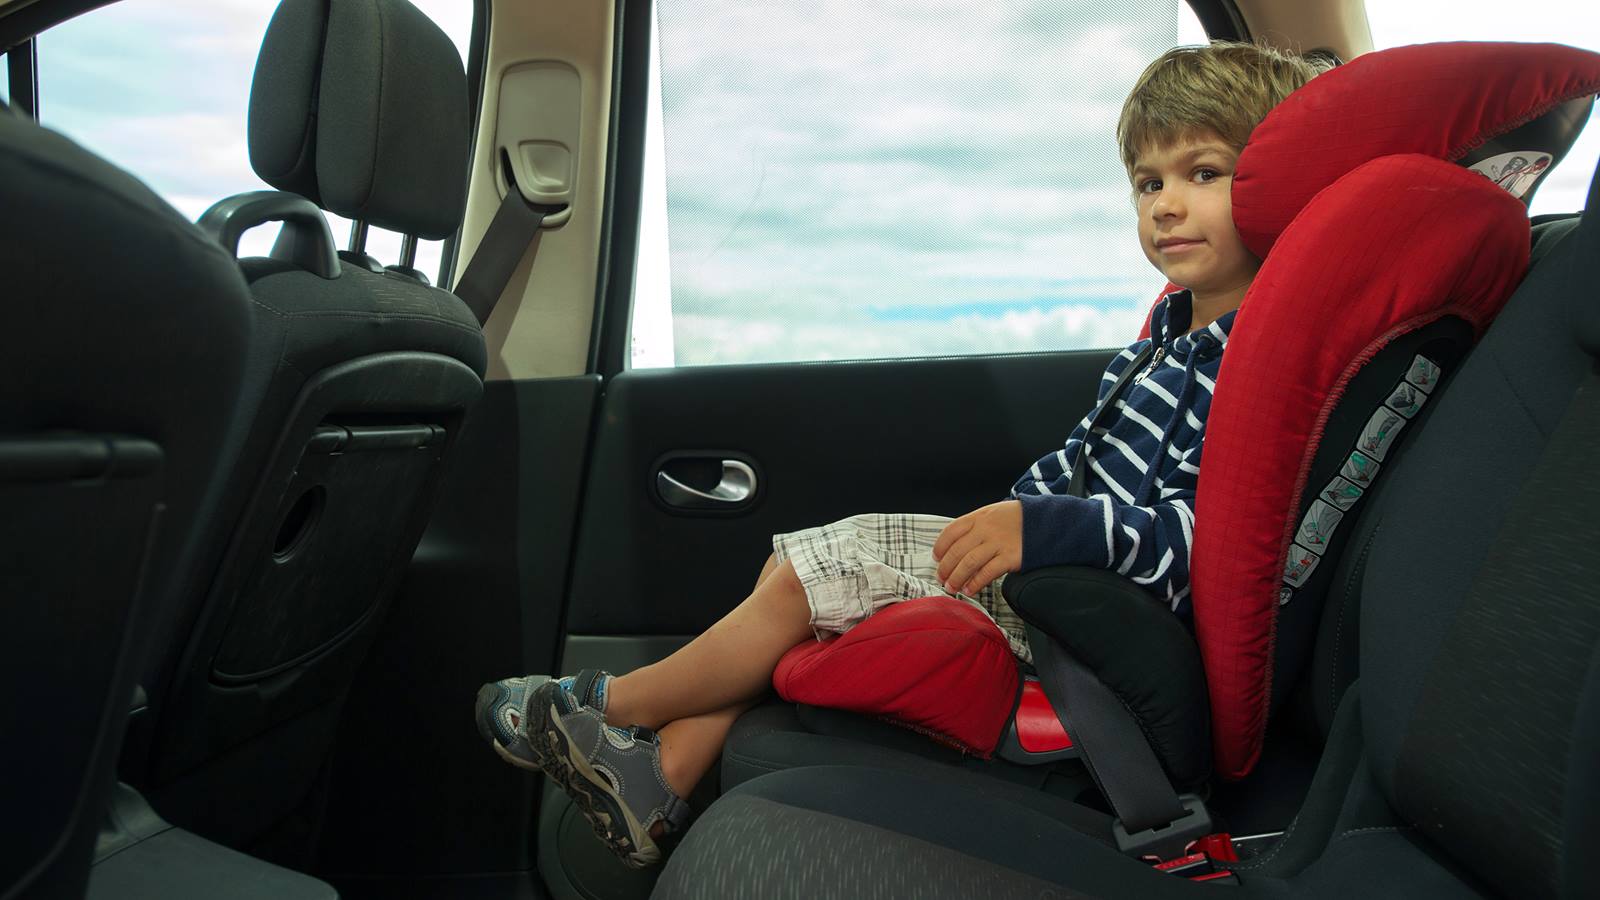 Child Ready To Move Into A Booster Seat, What Age Can A Child Sit In Backless Booster Seat